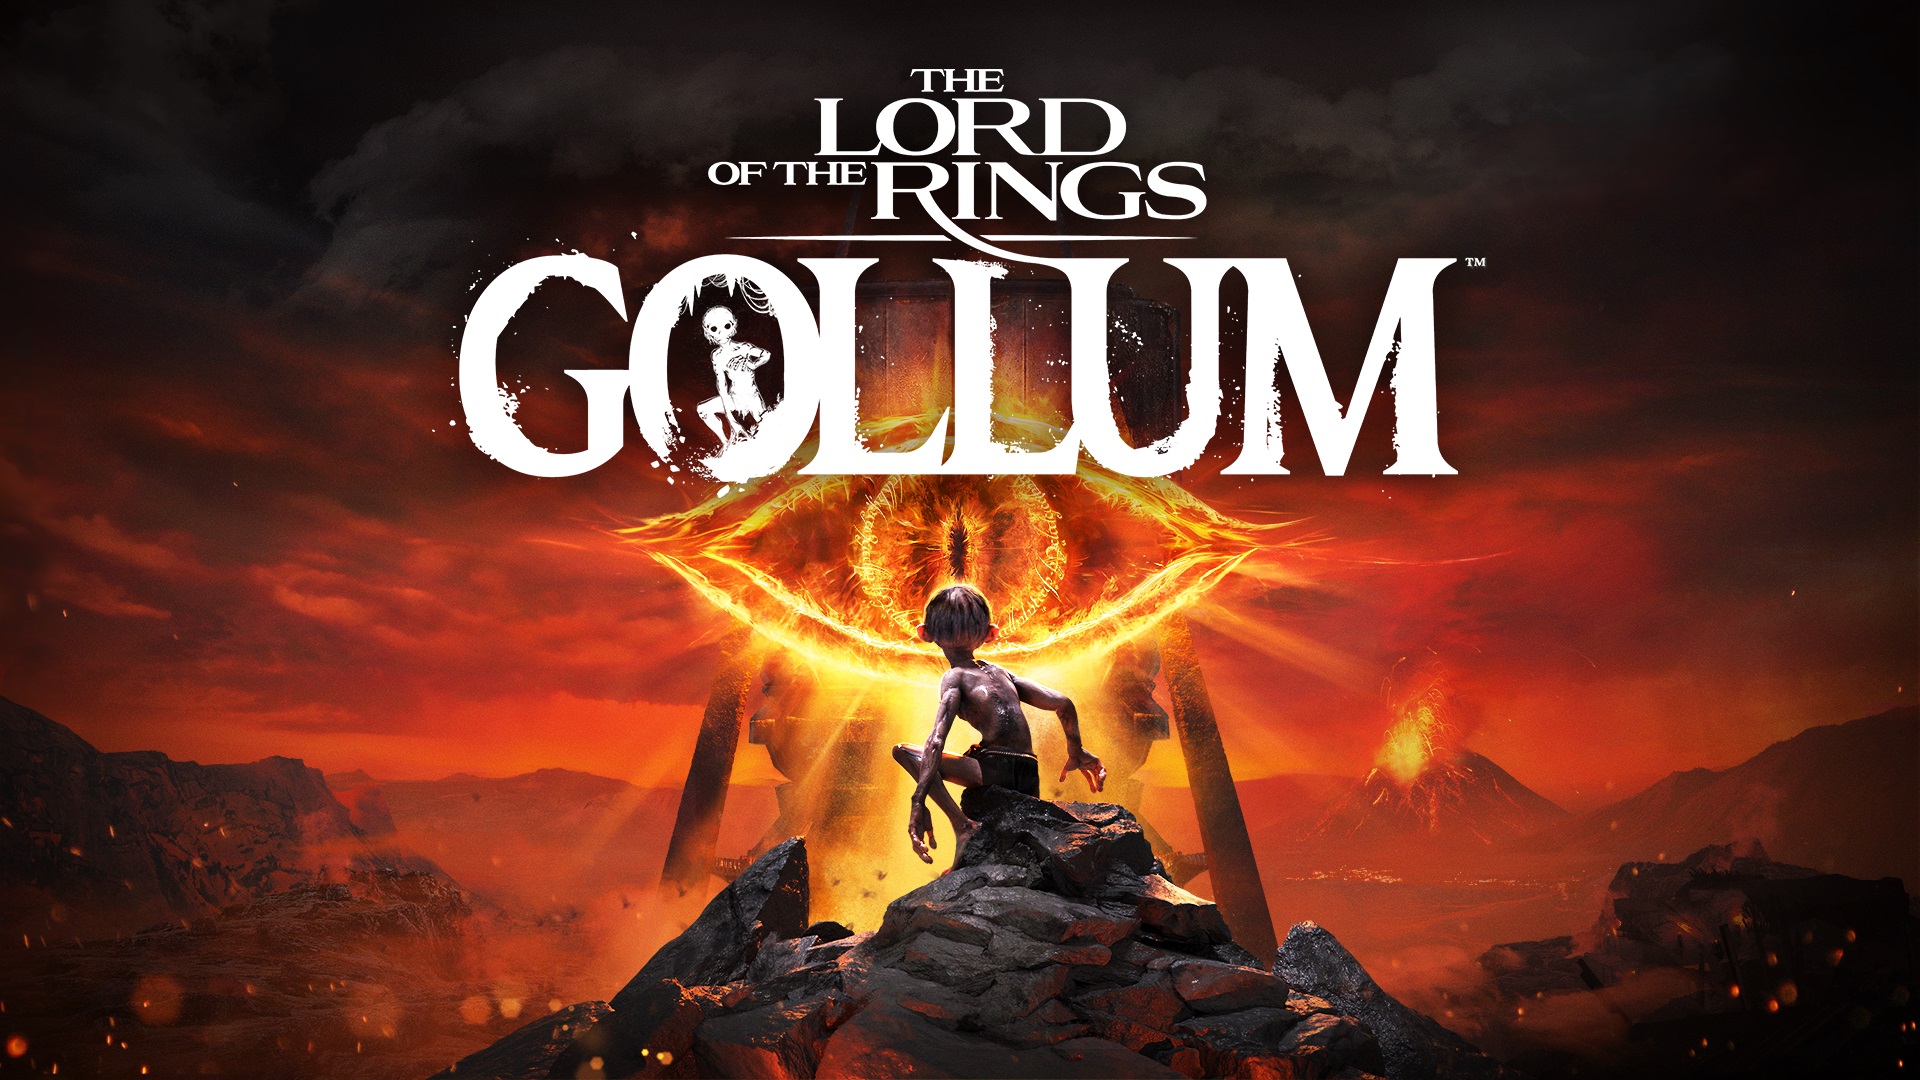 The Lord of the Rings: Gollum release date set for May